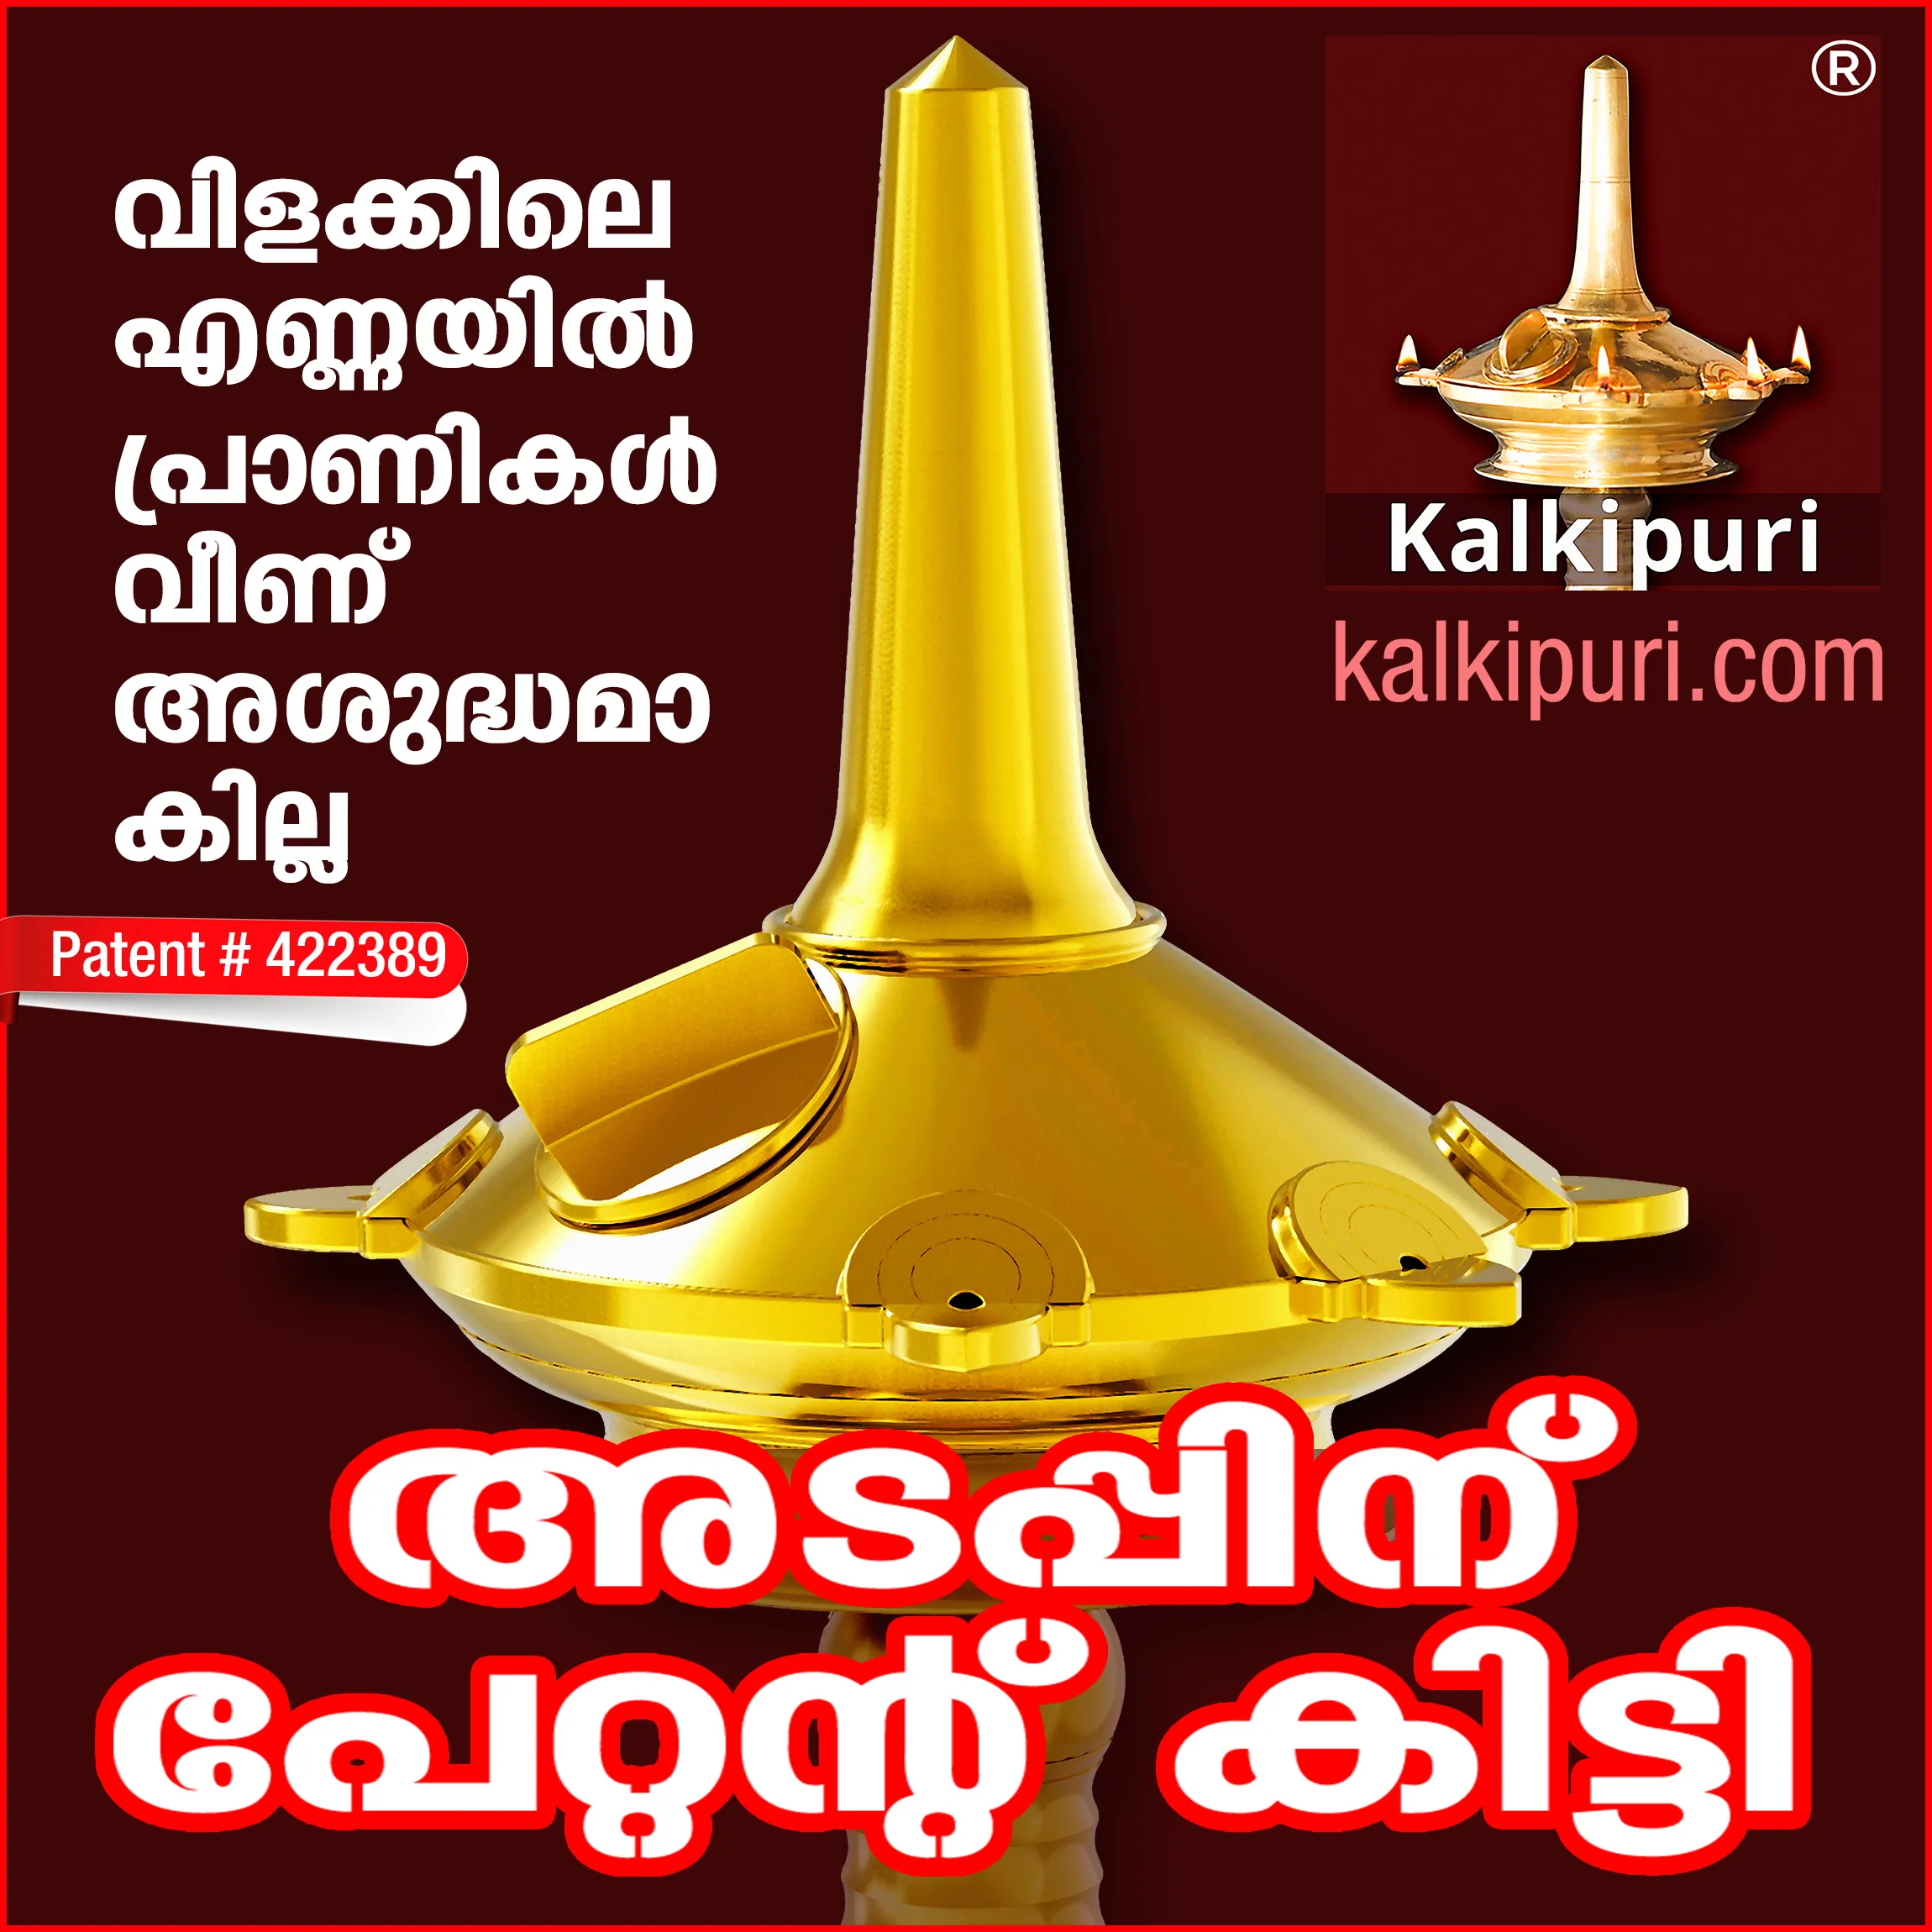 PATENTED (No.422389) KALKIPURI INSECT FREE OIL LAMPS